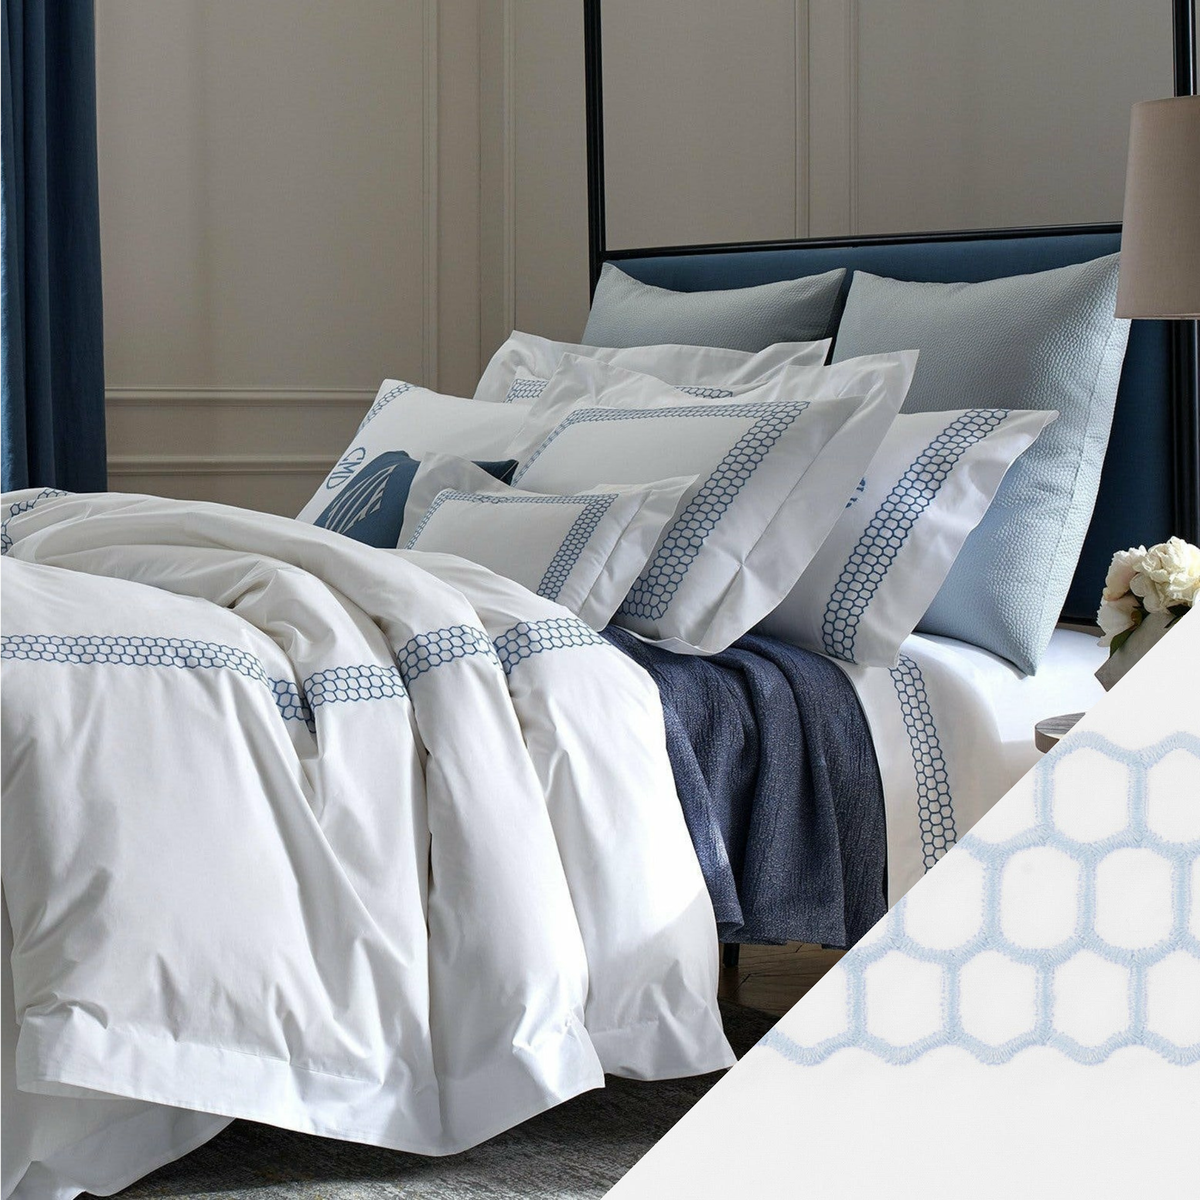 Full Image of Matouk Liana Bedding in Wedgwood Color